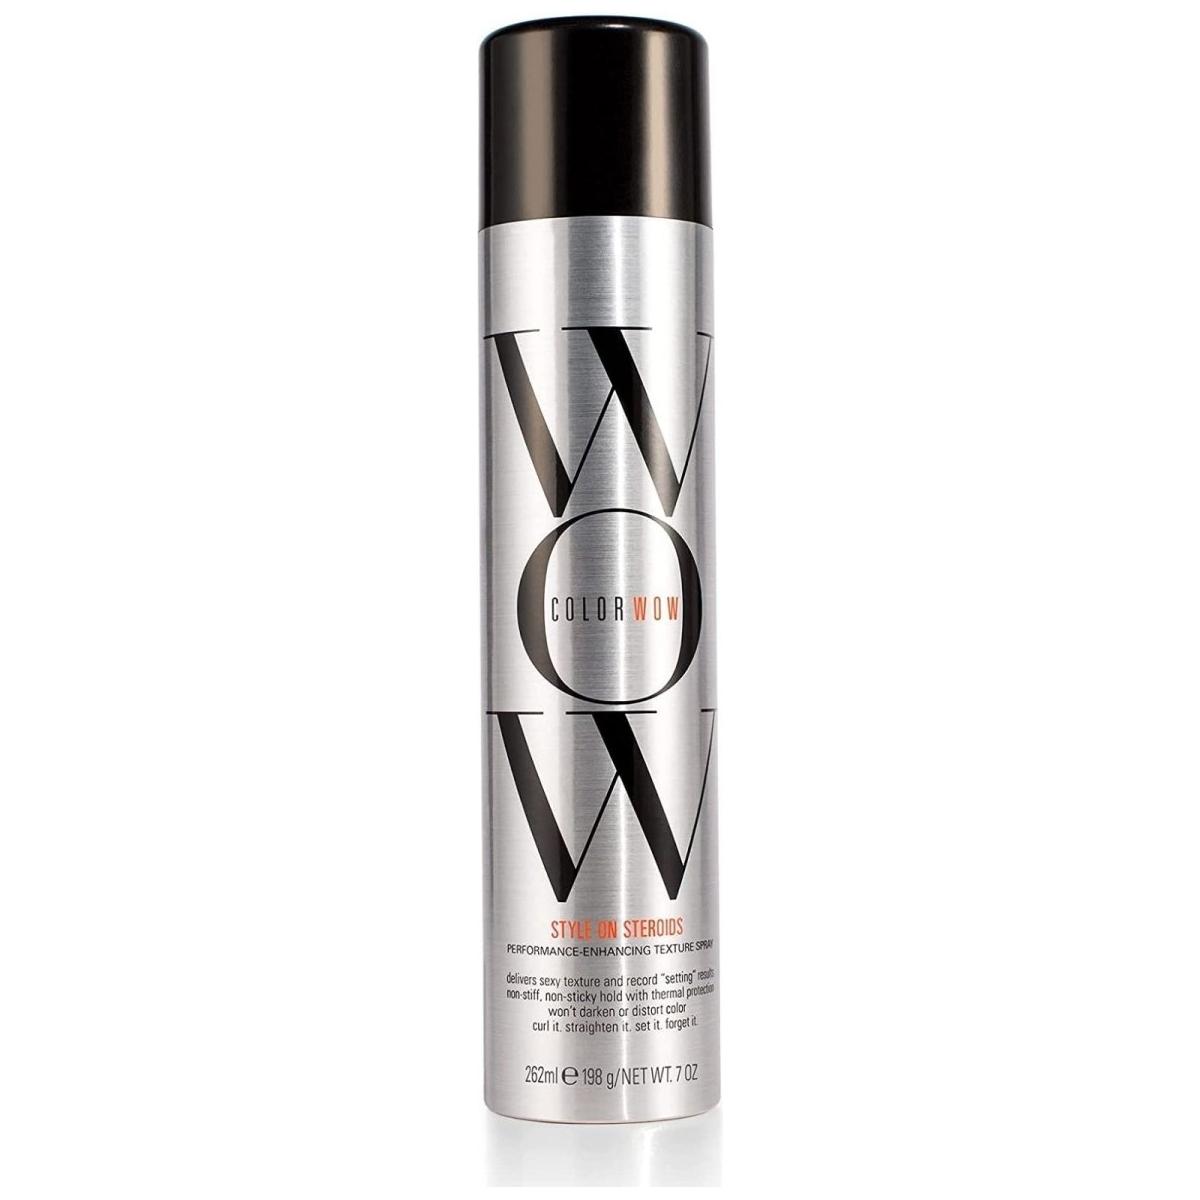 Color Wow | Style on Steroids Texture Spray 262ml - DG International Ventures Limited